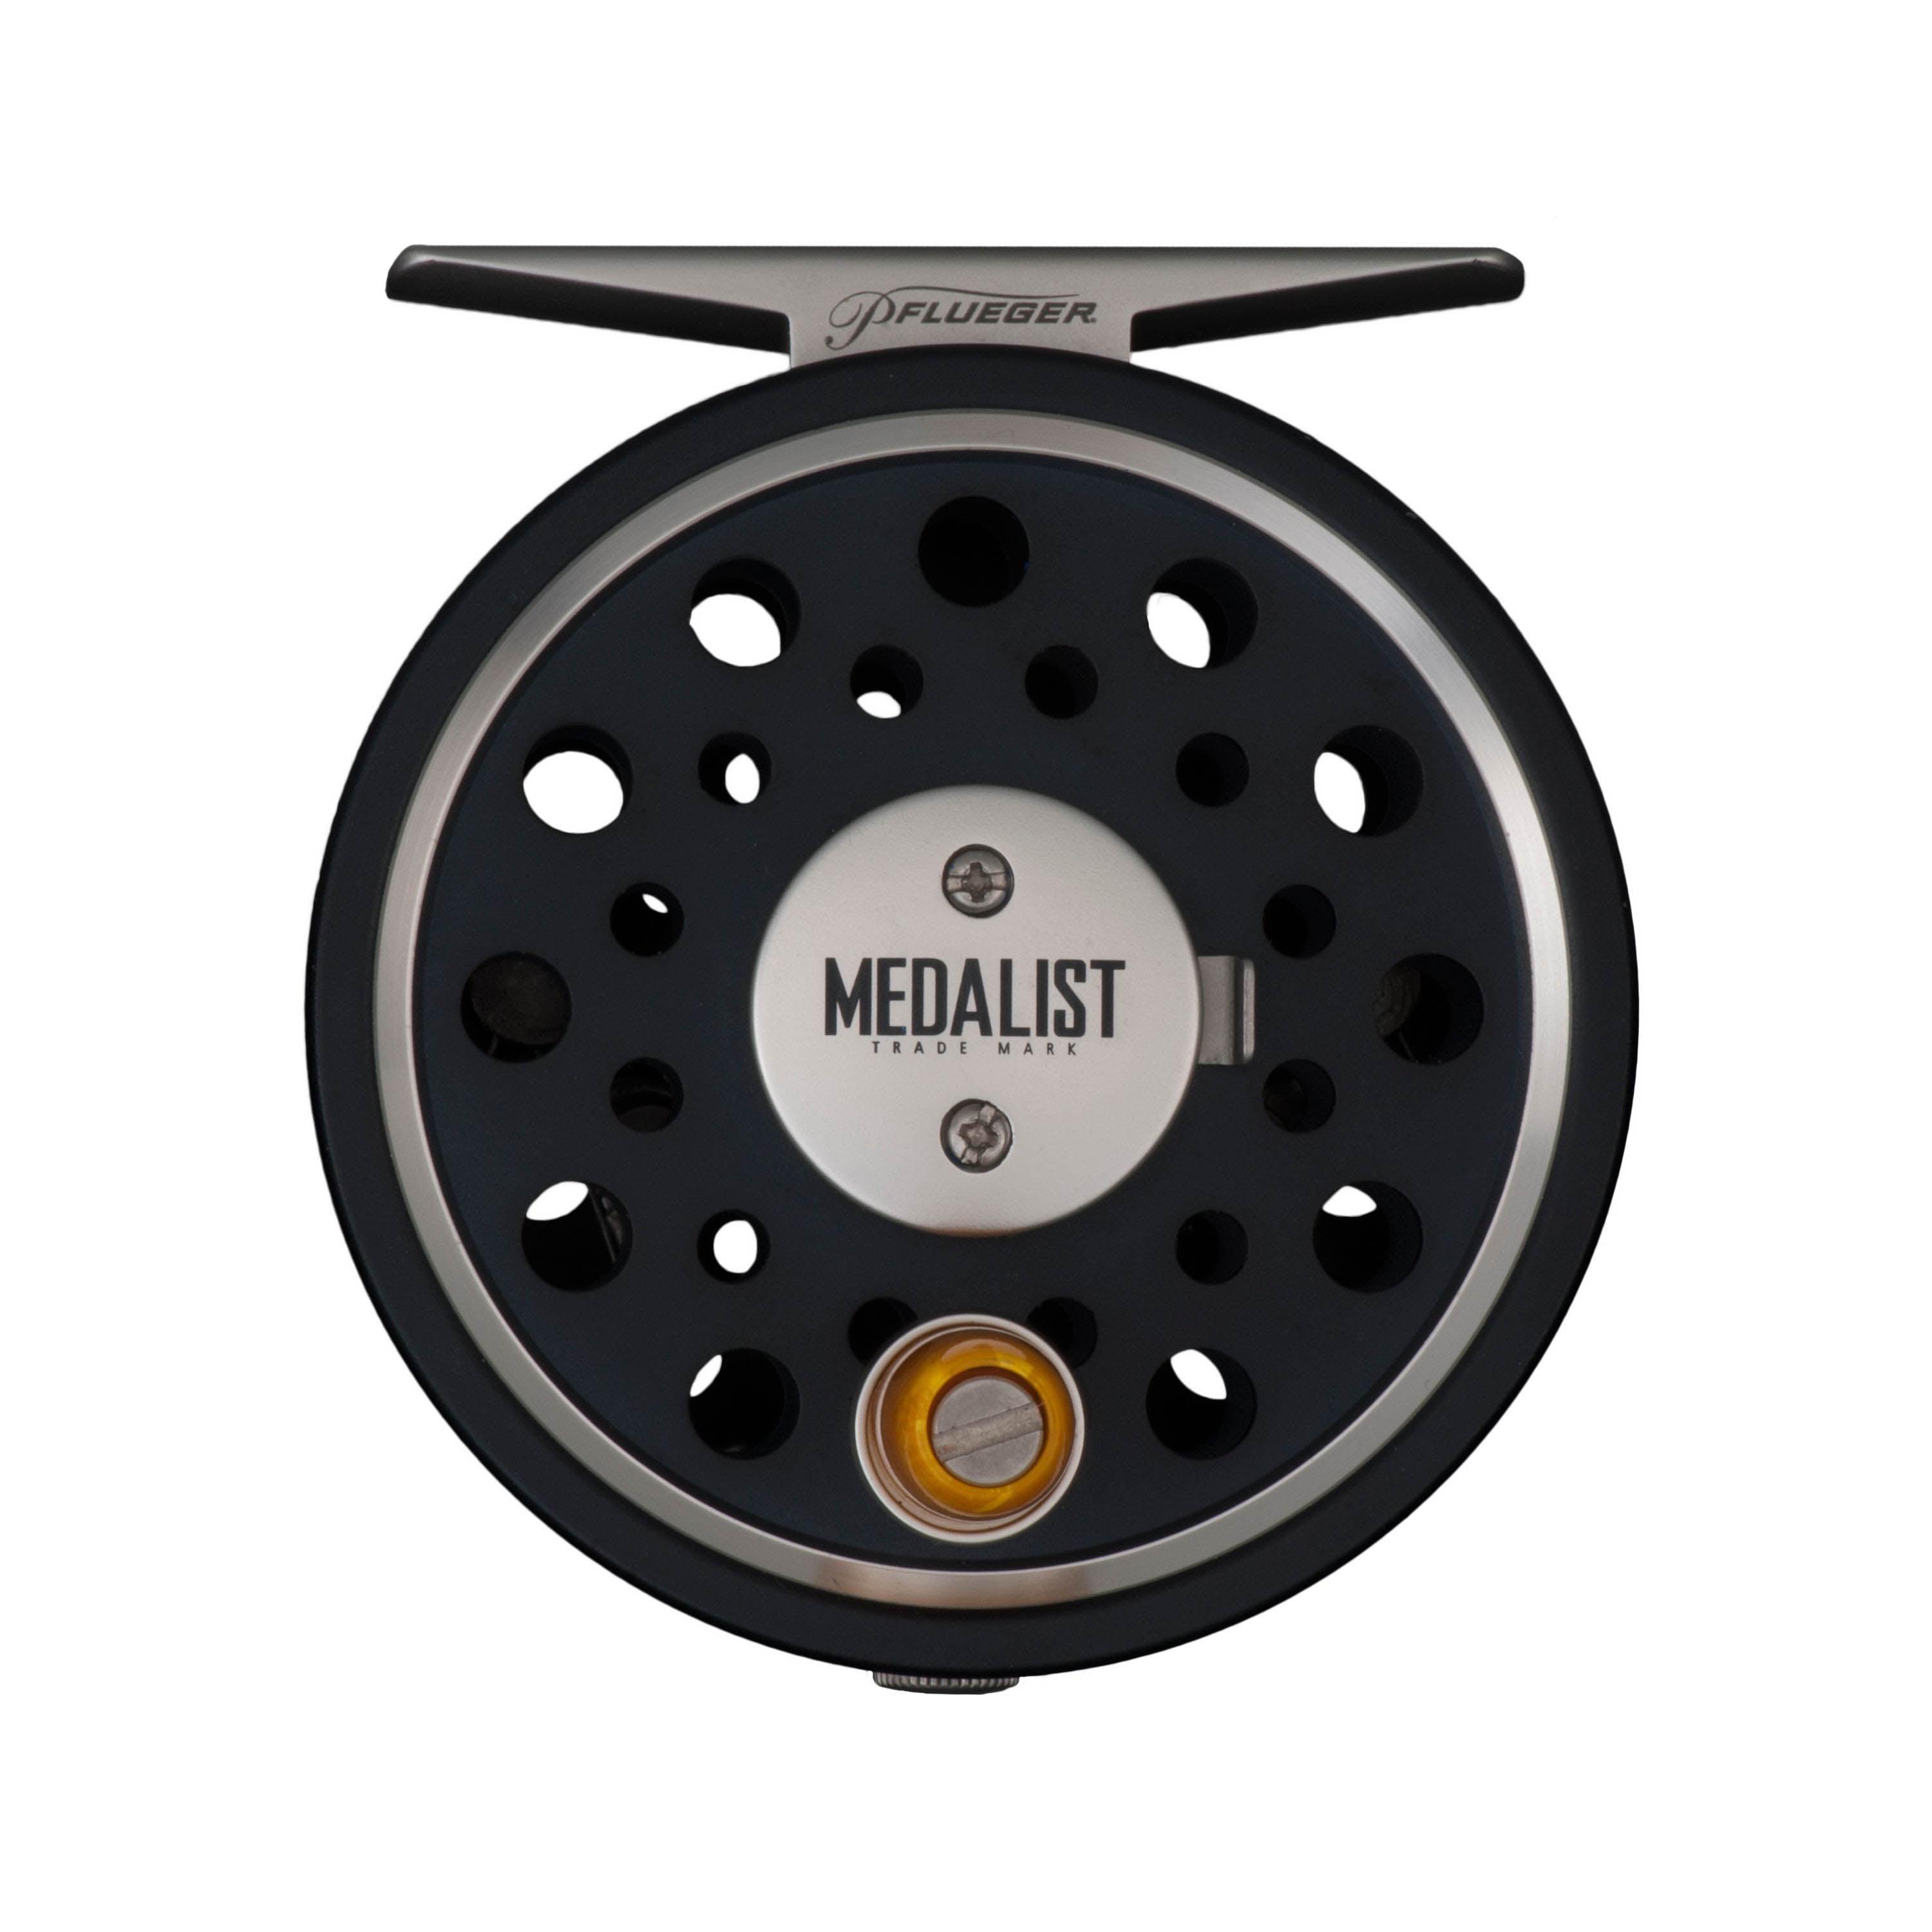 WQJNWEQ Fly Reel 7/8 WT Large Arbor Silver/Black Aluminum Fly Fishing Reel  Sales Clearance Items 